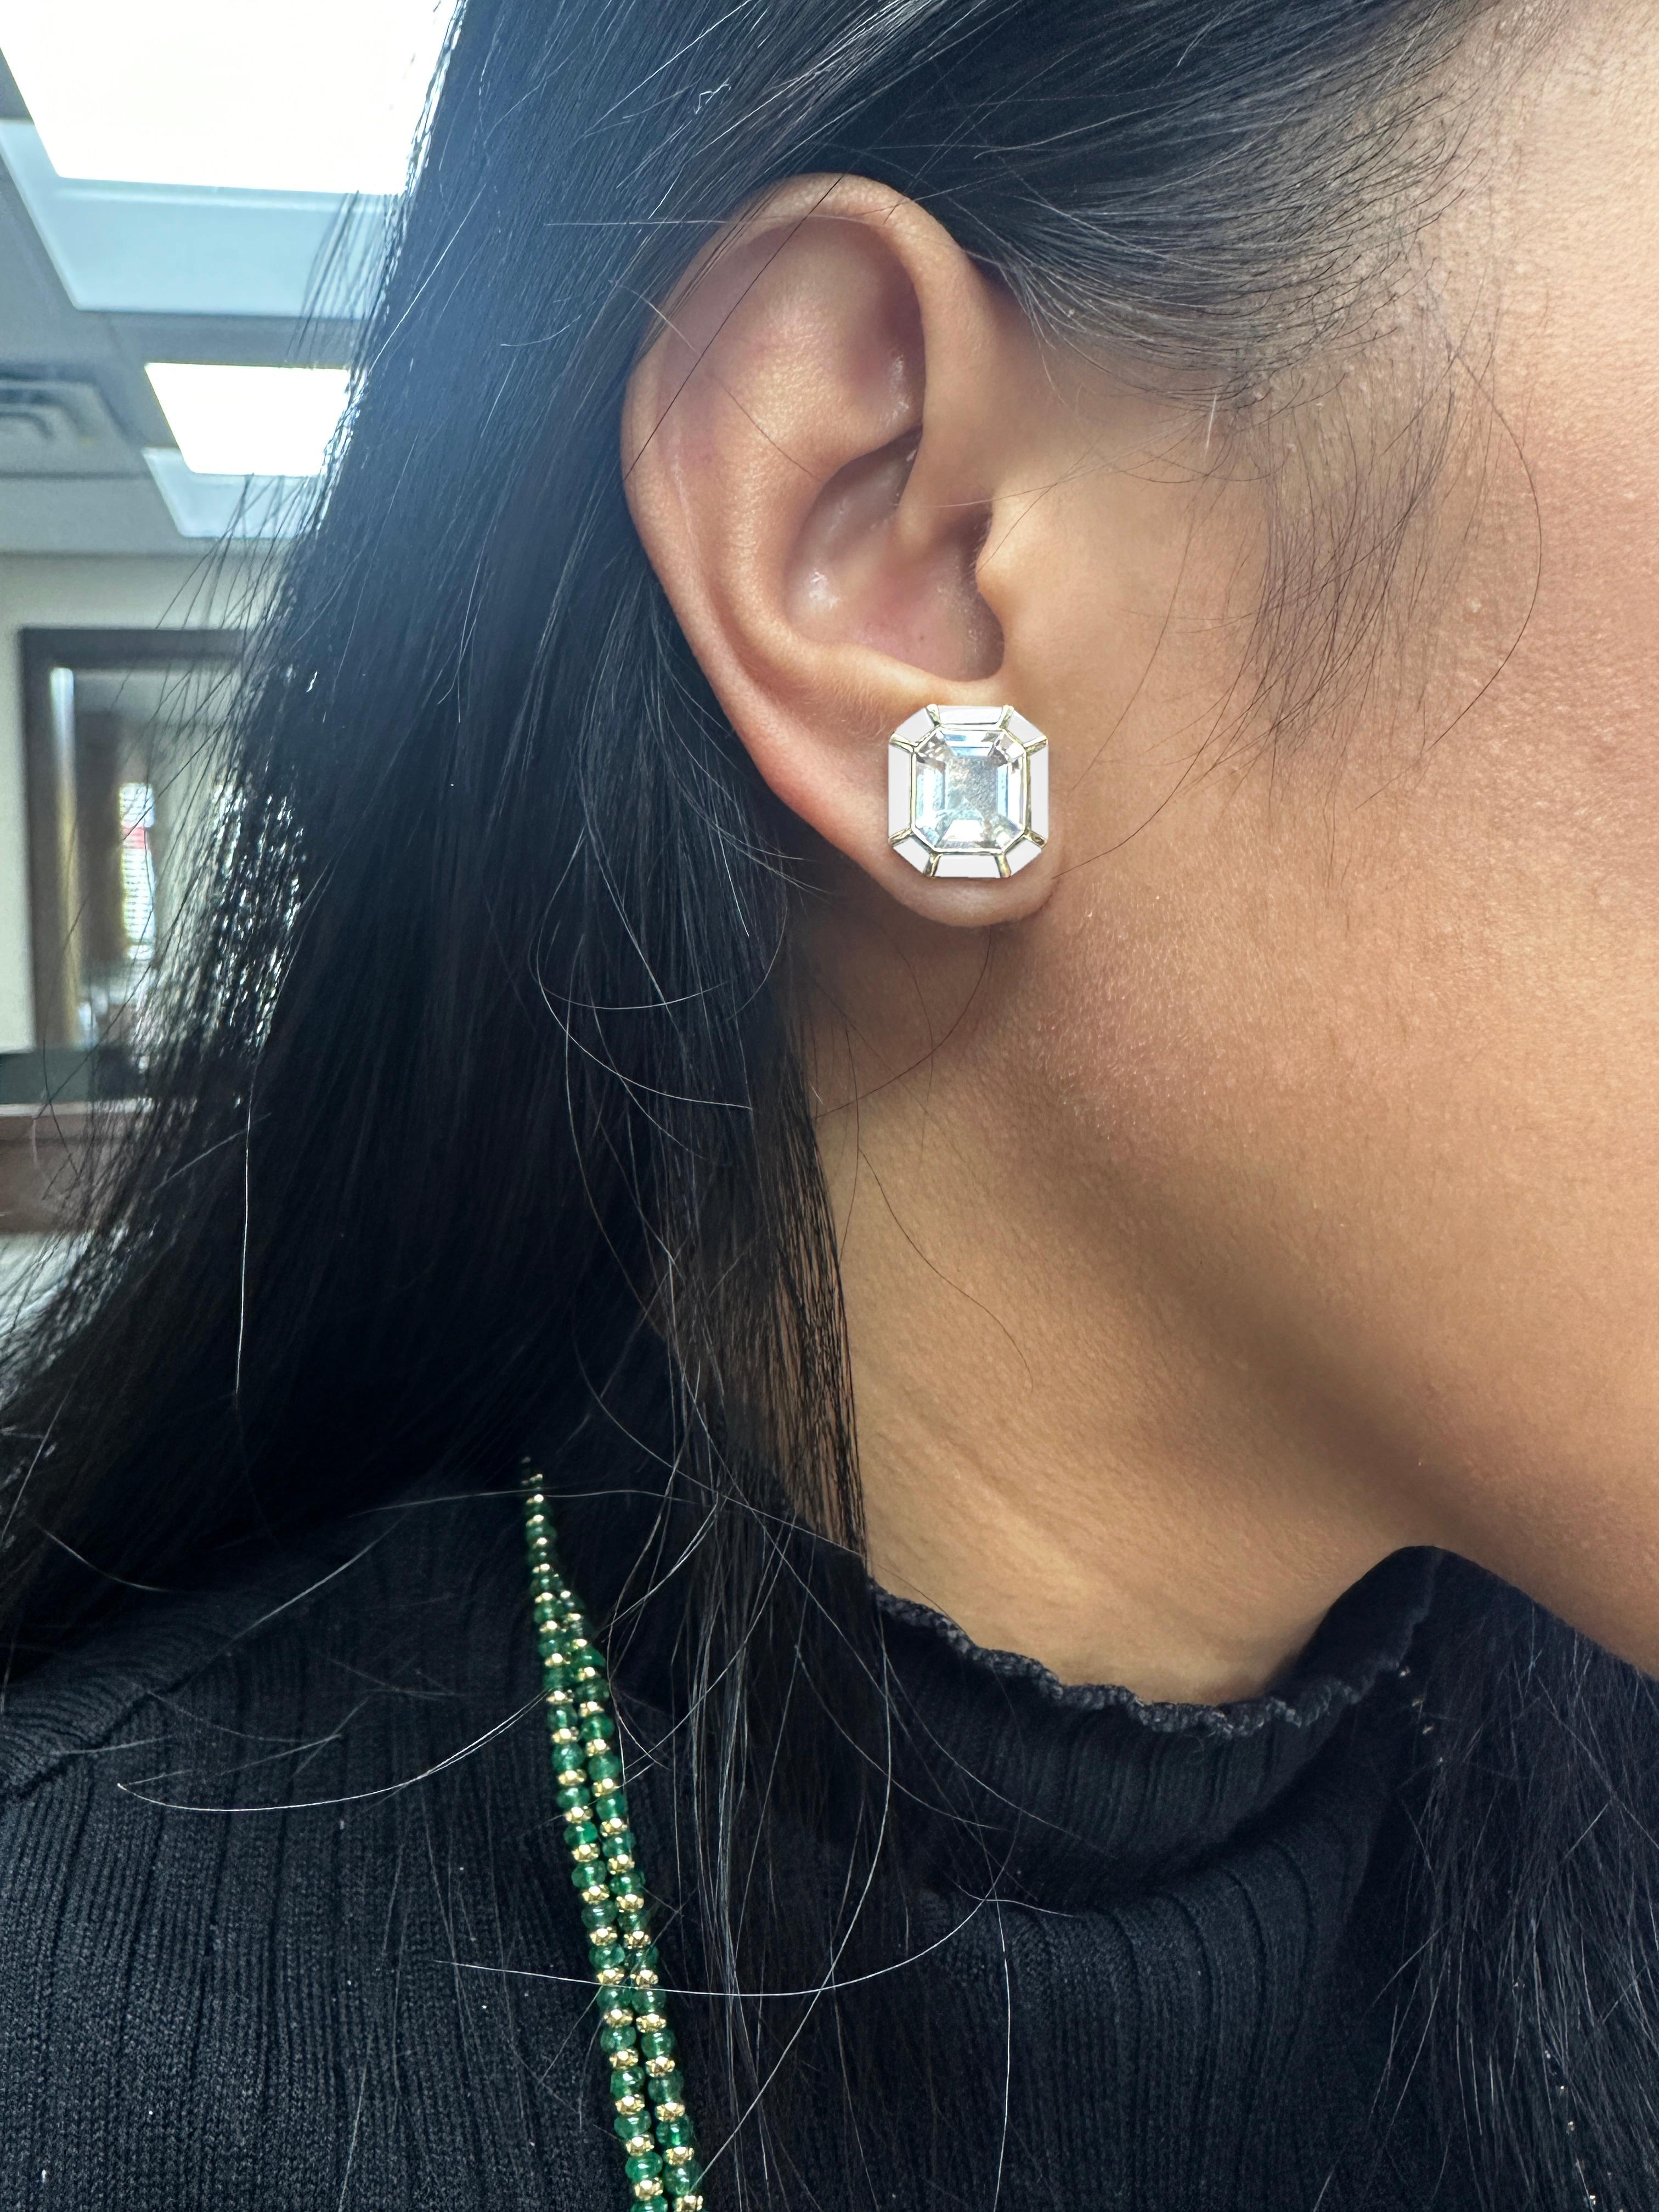 The Rock Crystal & White Agate Stud Earrings from the 'Melange' Collection showcase a captivating blend of elegance and charm. Crafted with exquisite attention to detail, these earrings feature stunning emerald cut Rock Crystal and White Agate